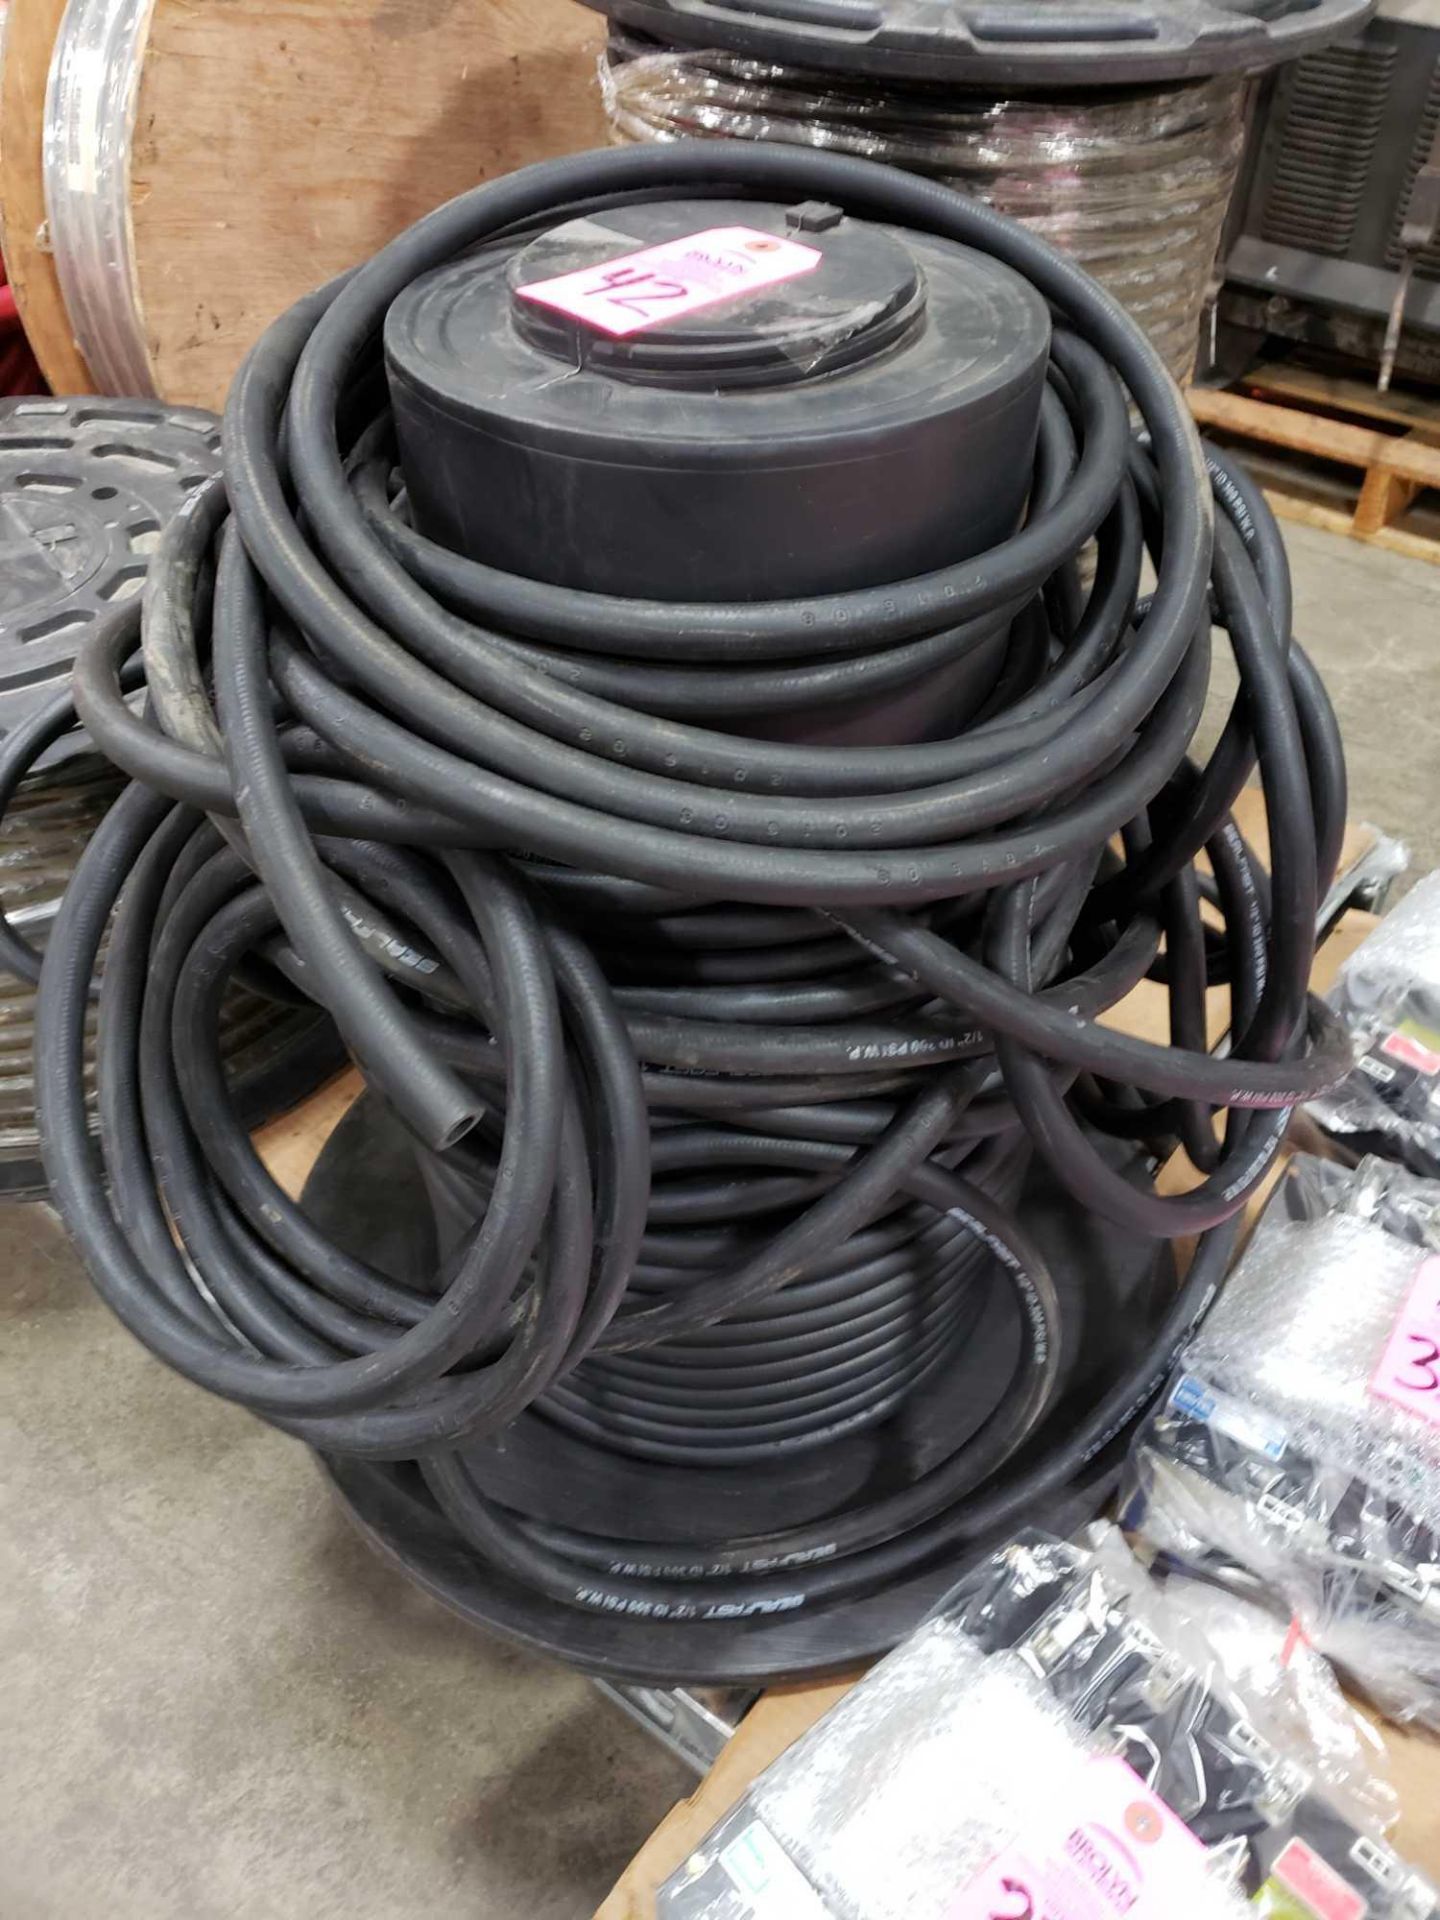 300psi Sealfast air and water hose 1/2"ID. New as pictured.